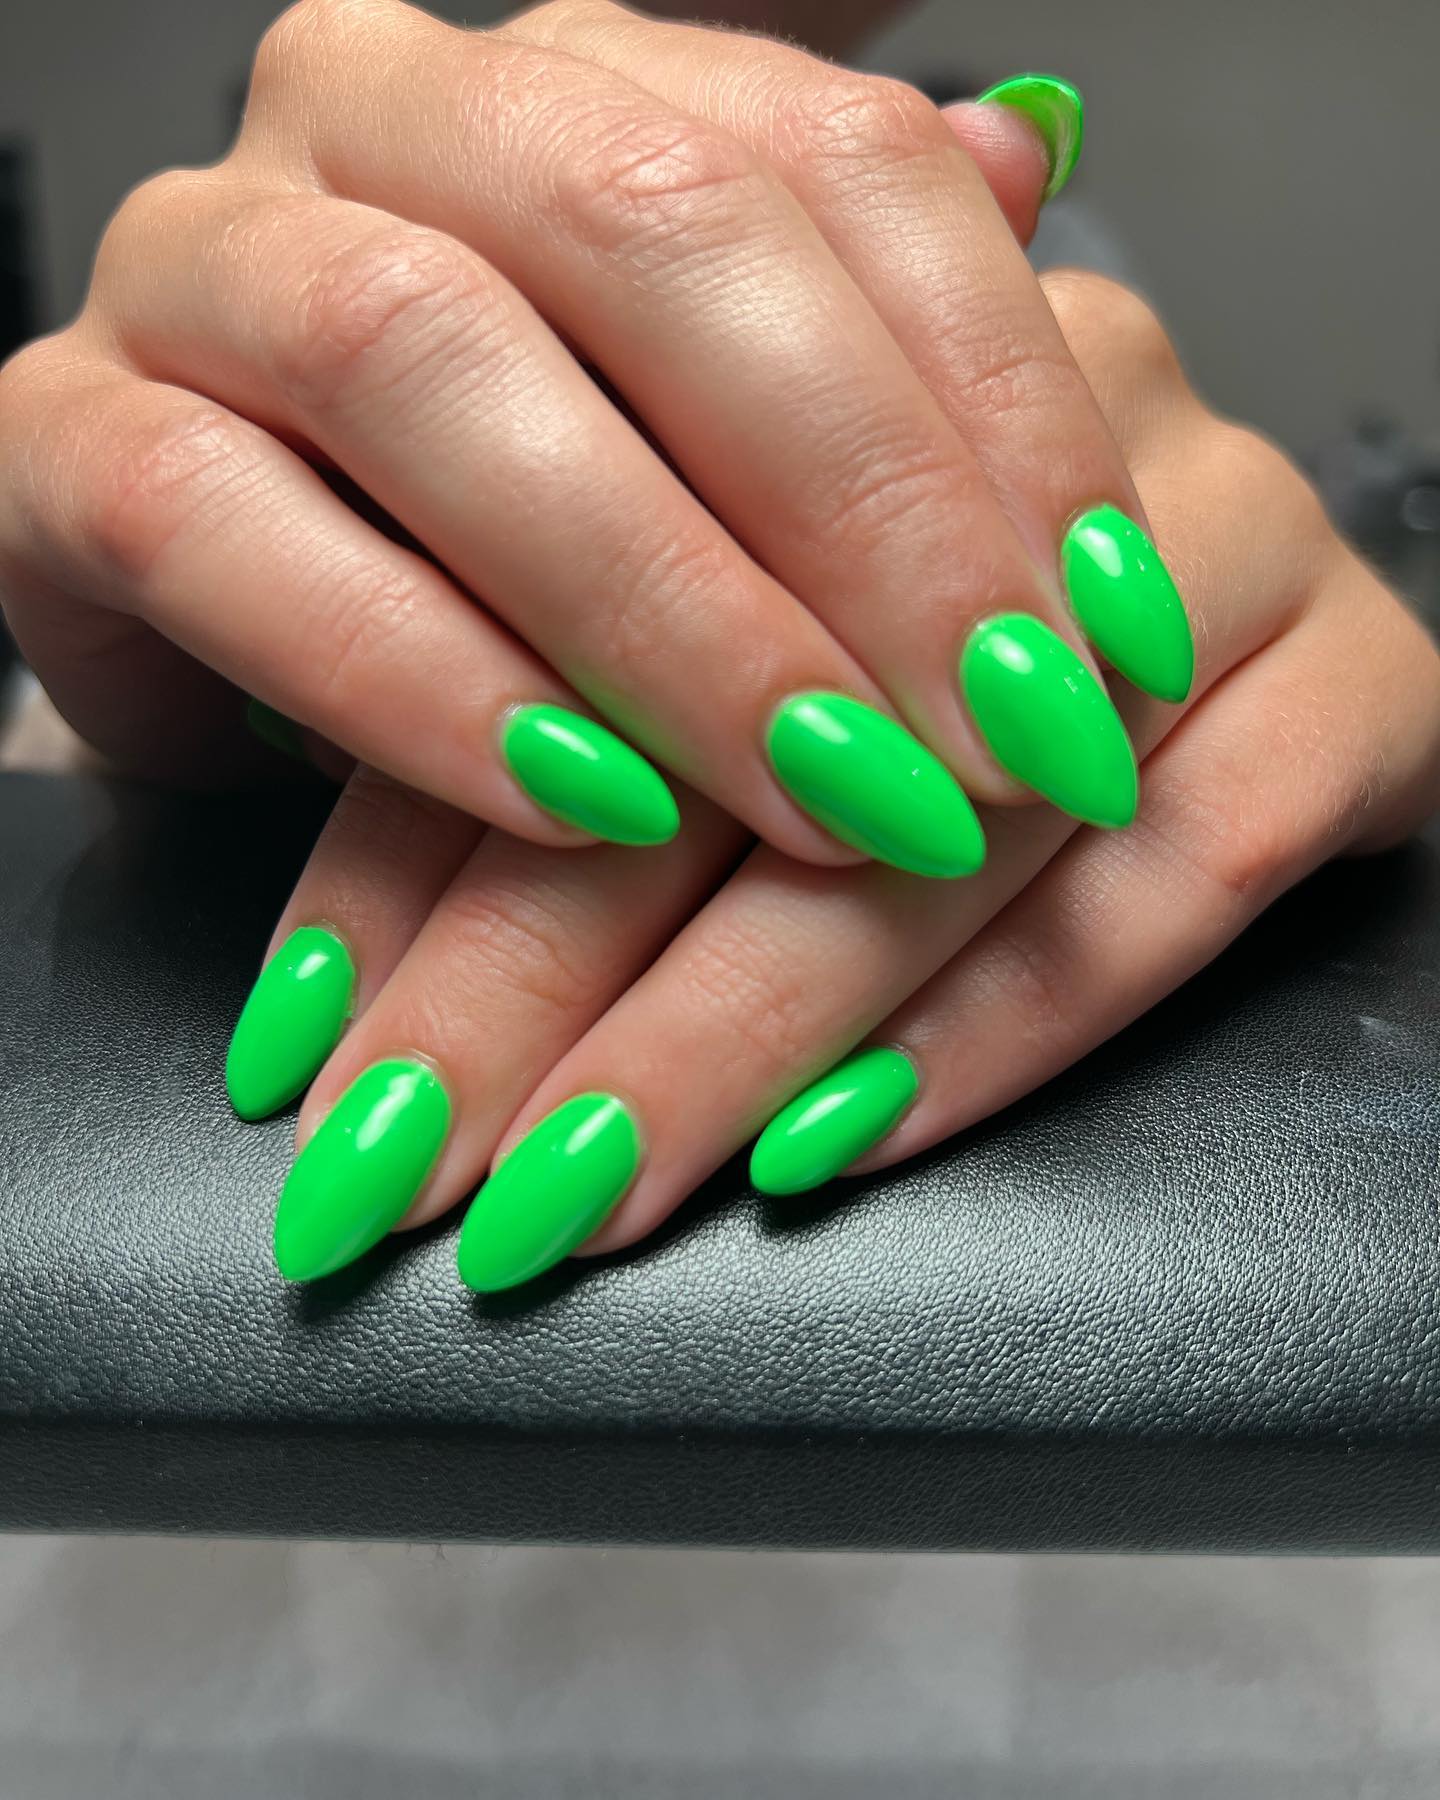 Medium-length almond nails are beautiful and we all agree on that, right? How about applying a neon green nail polish on them?